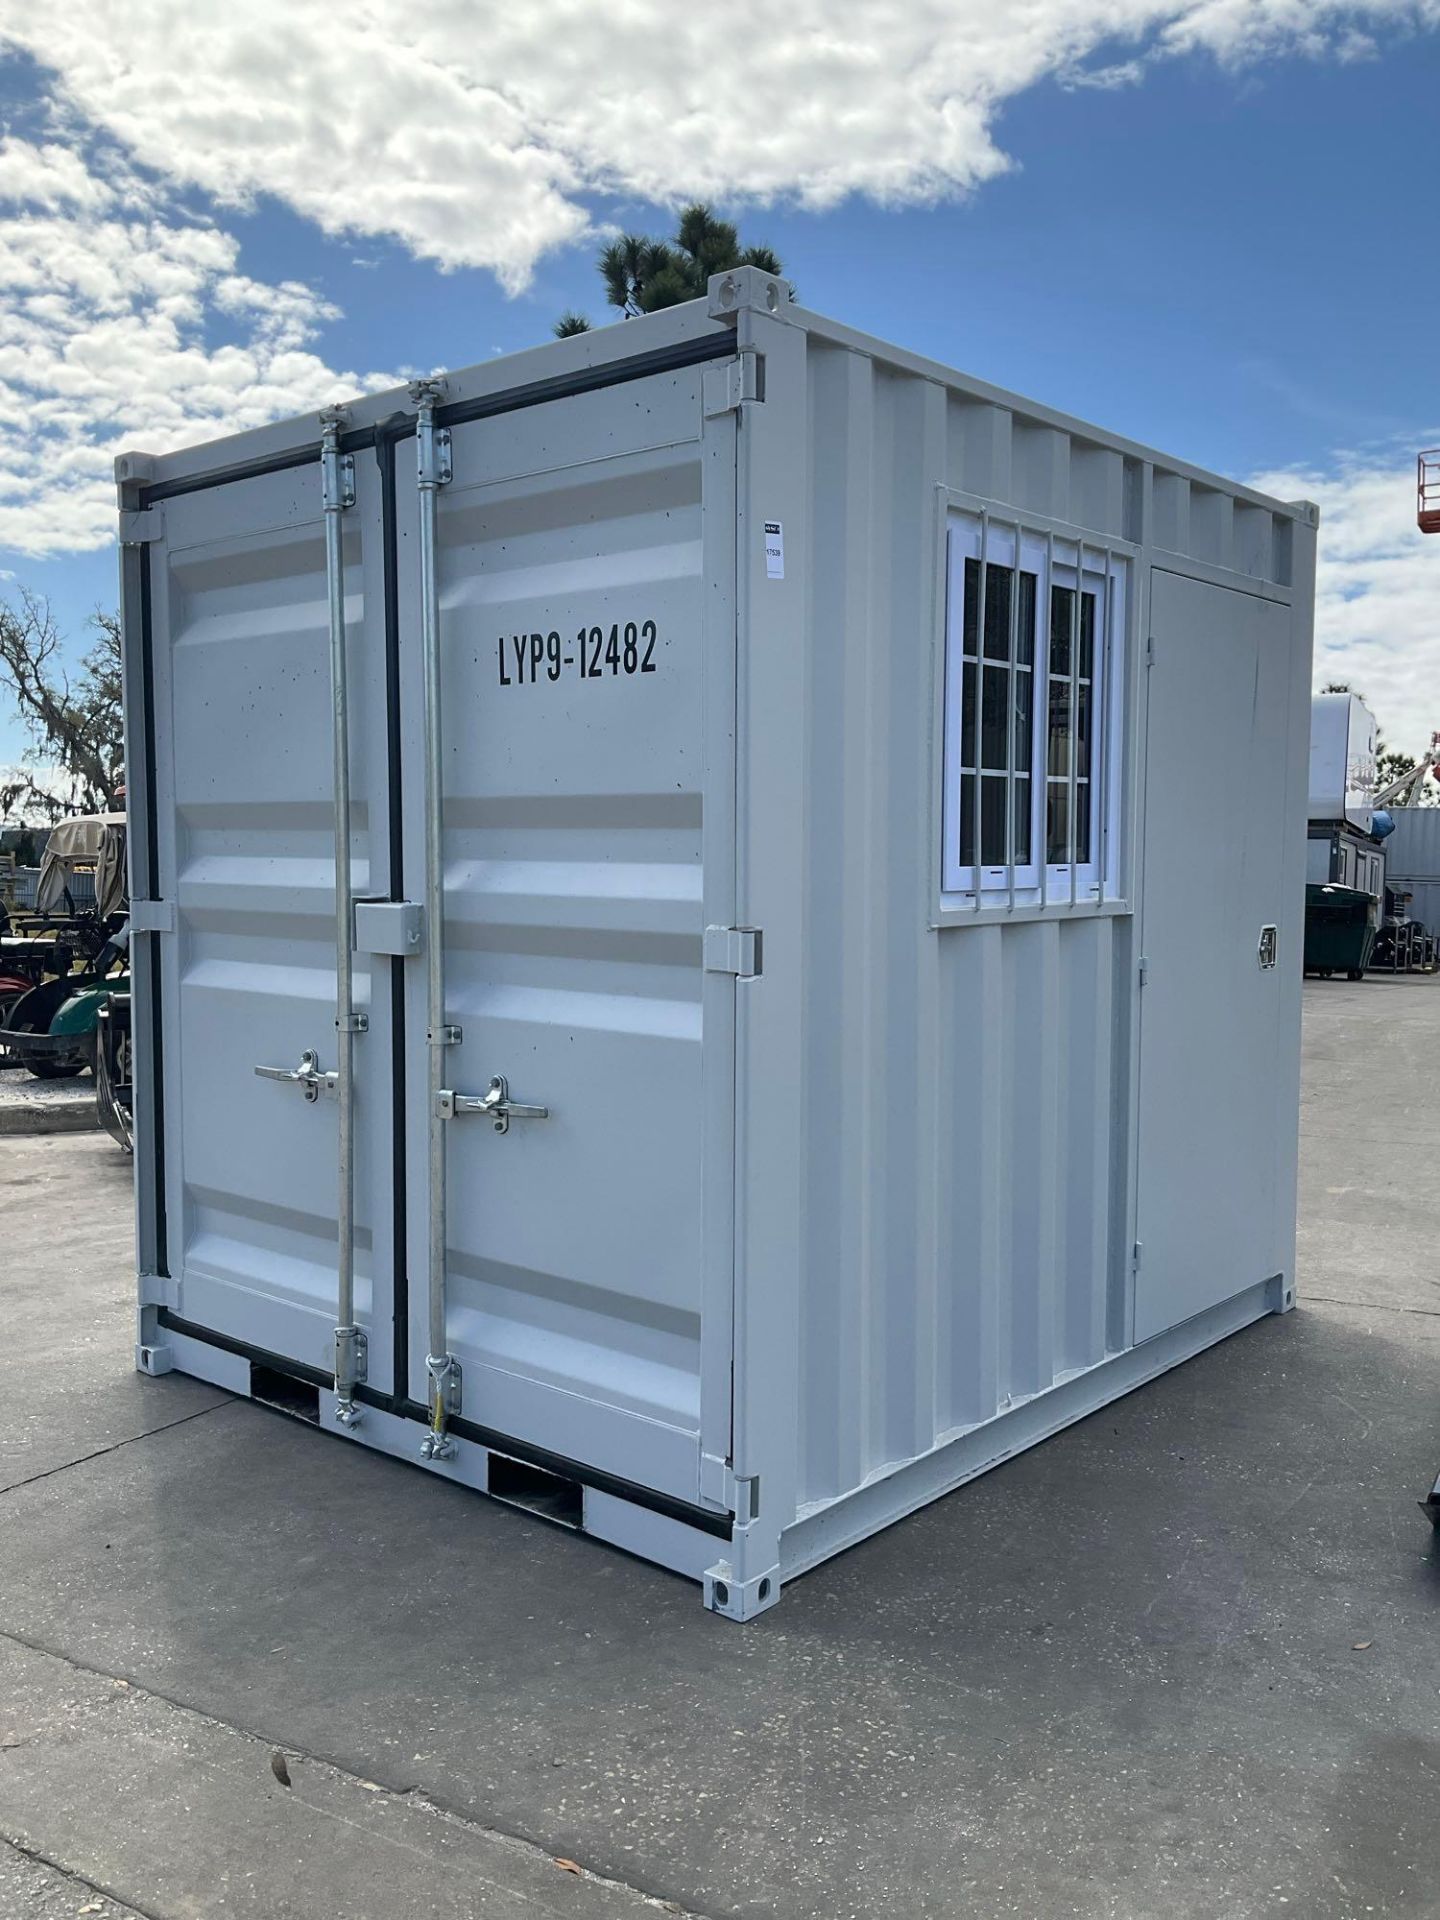 9' OFFICE / STORAGE CONTAINER, FORK POCKETS WITH SIDE DOOR ENTRANCE & SIDE WINDOW, APPROX 99'' T x